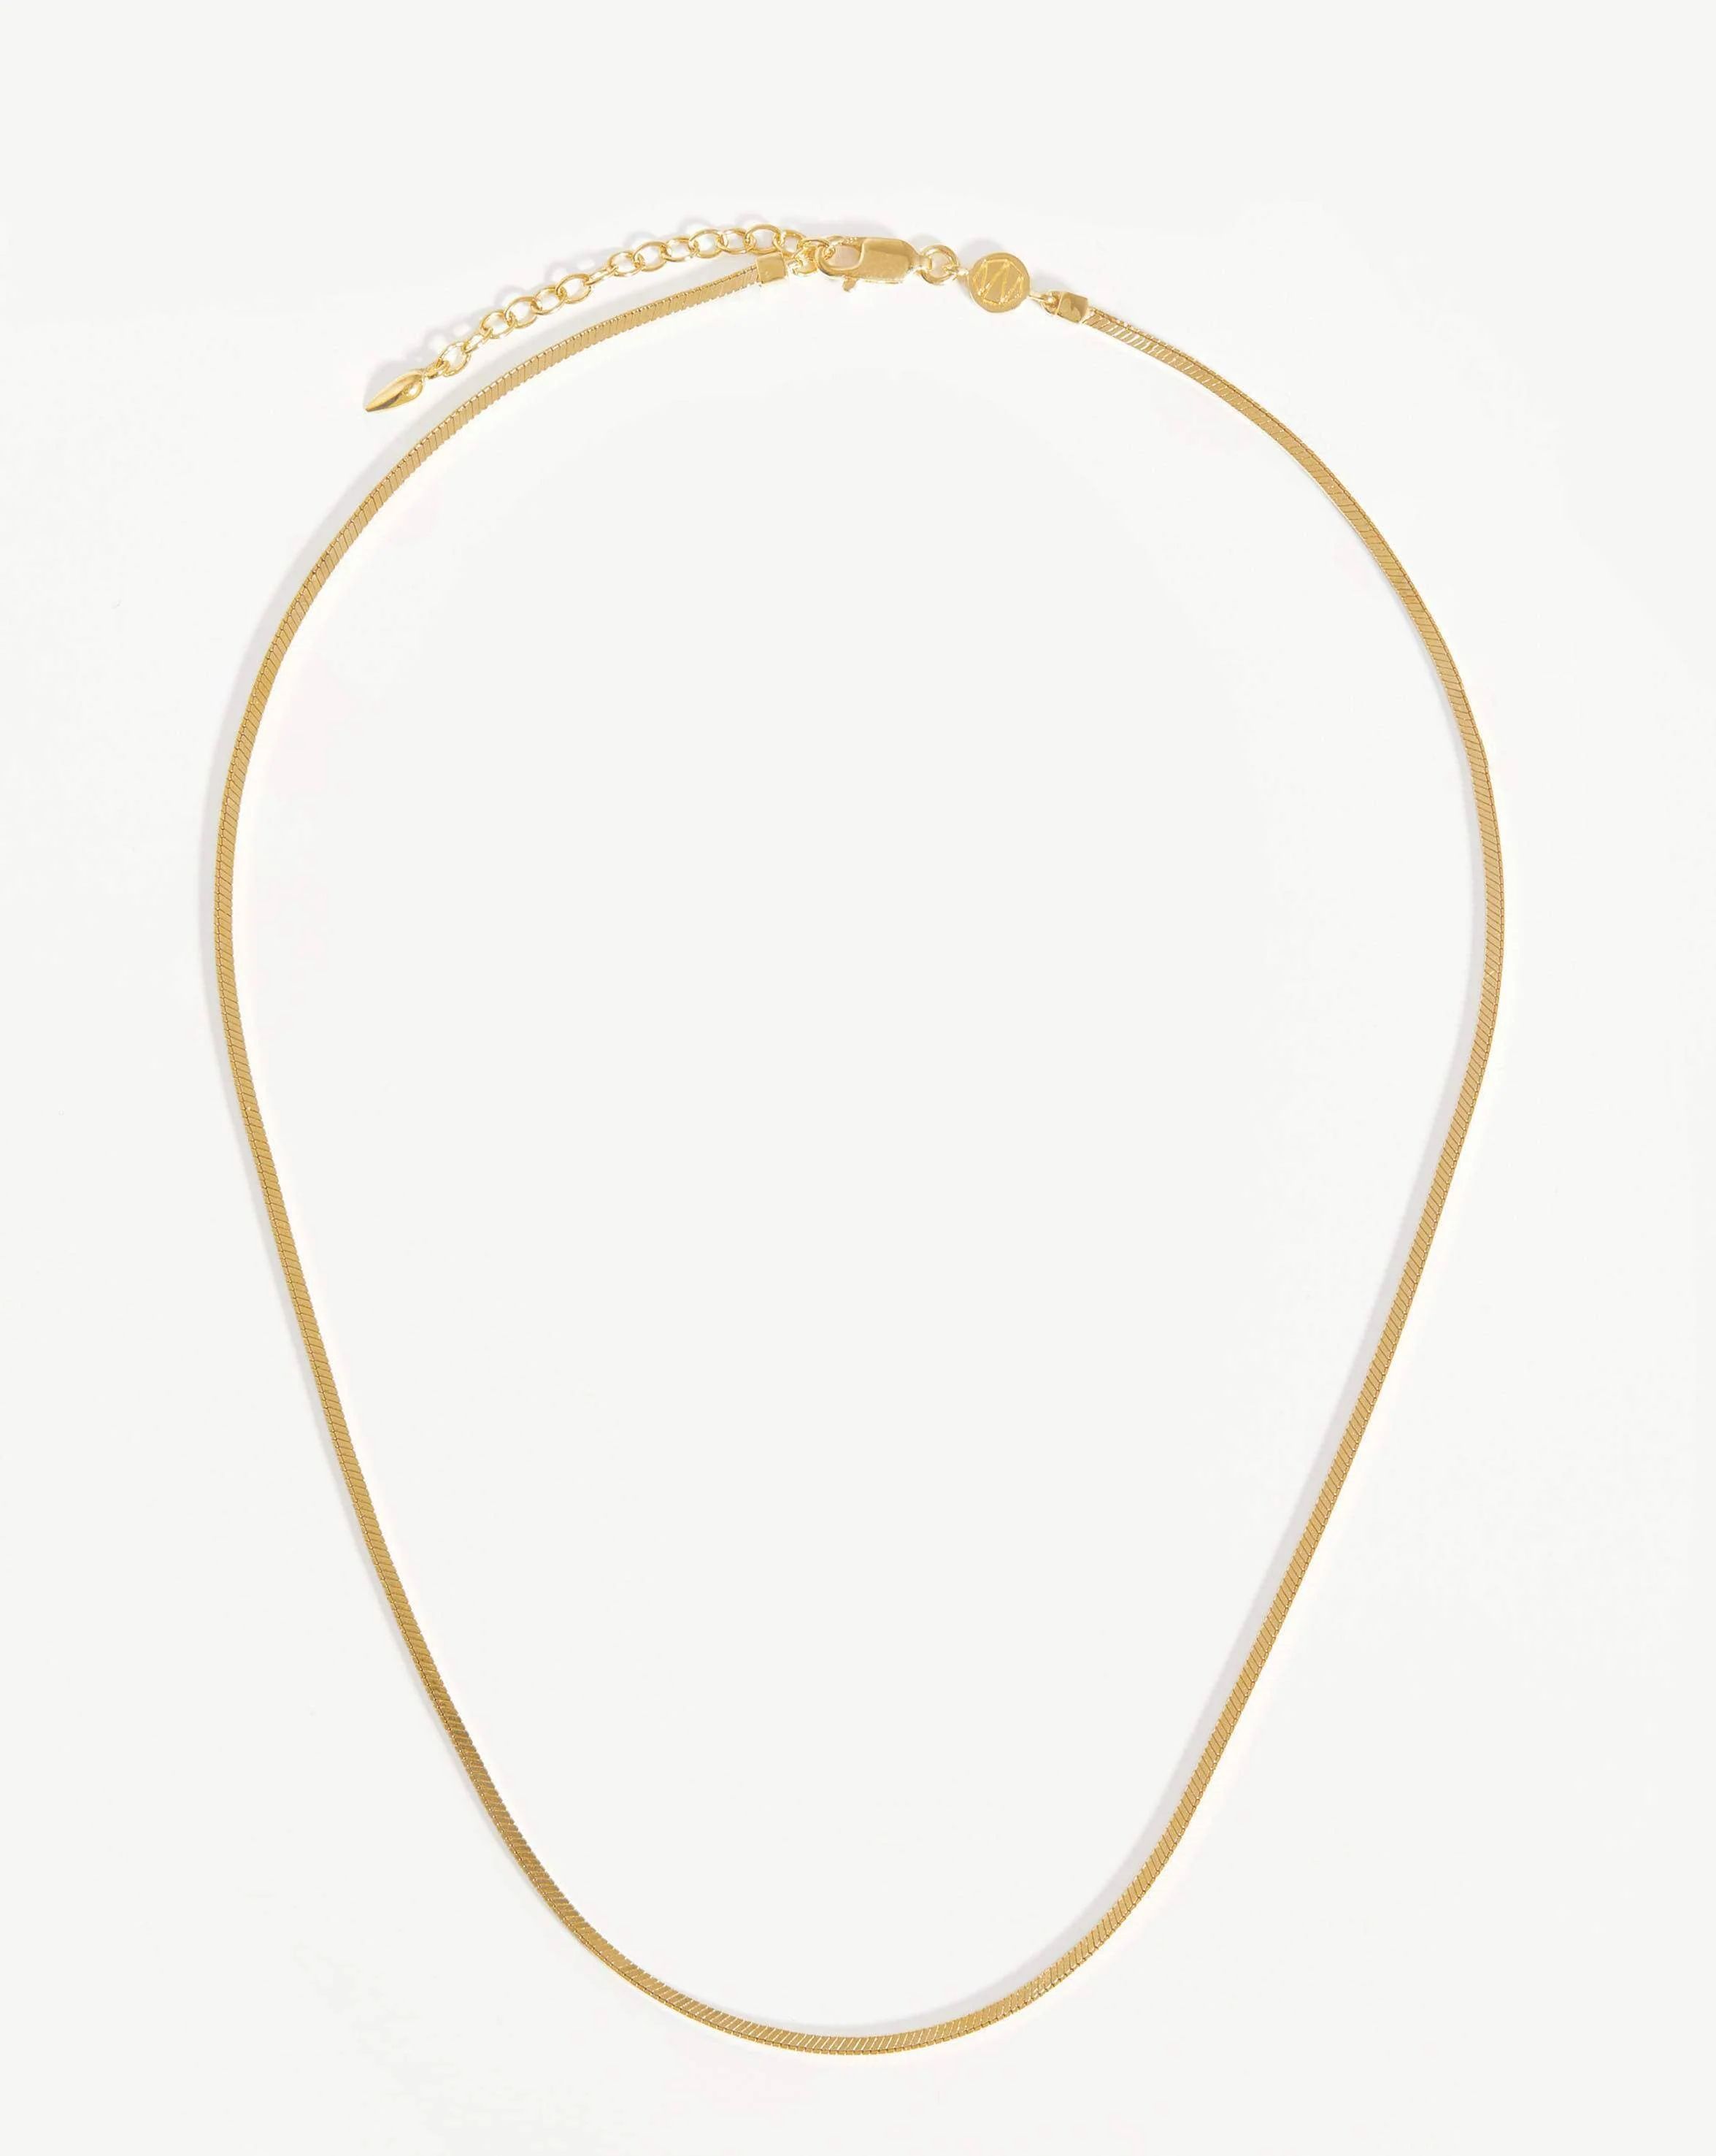 Lucy Williams Short Square Snake Chain Necklace | Missoma